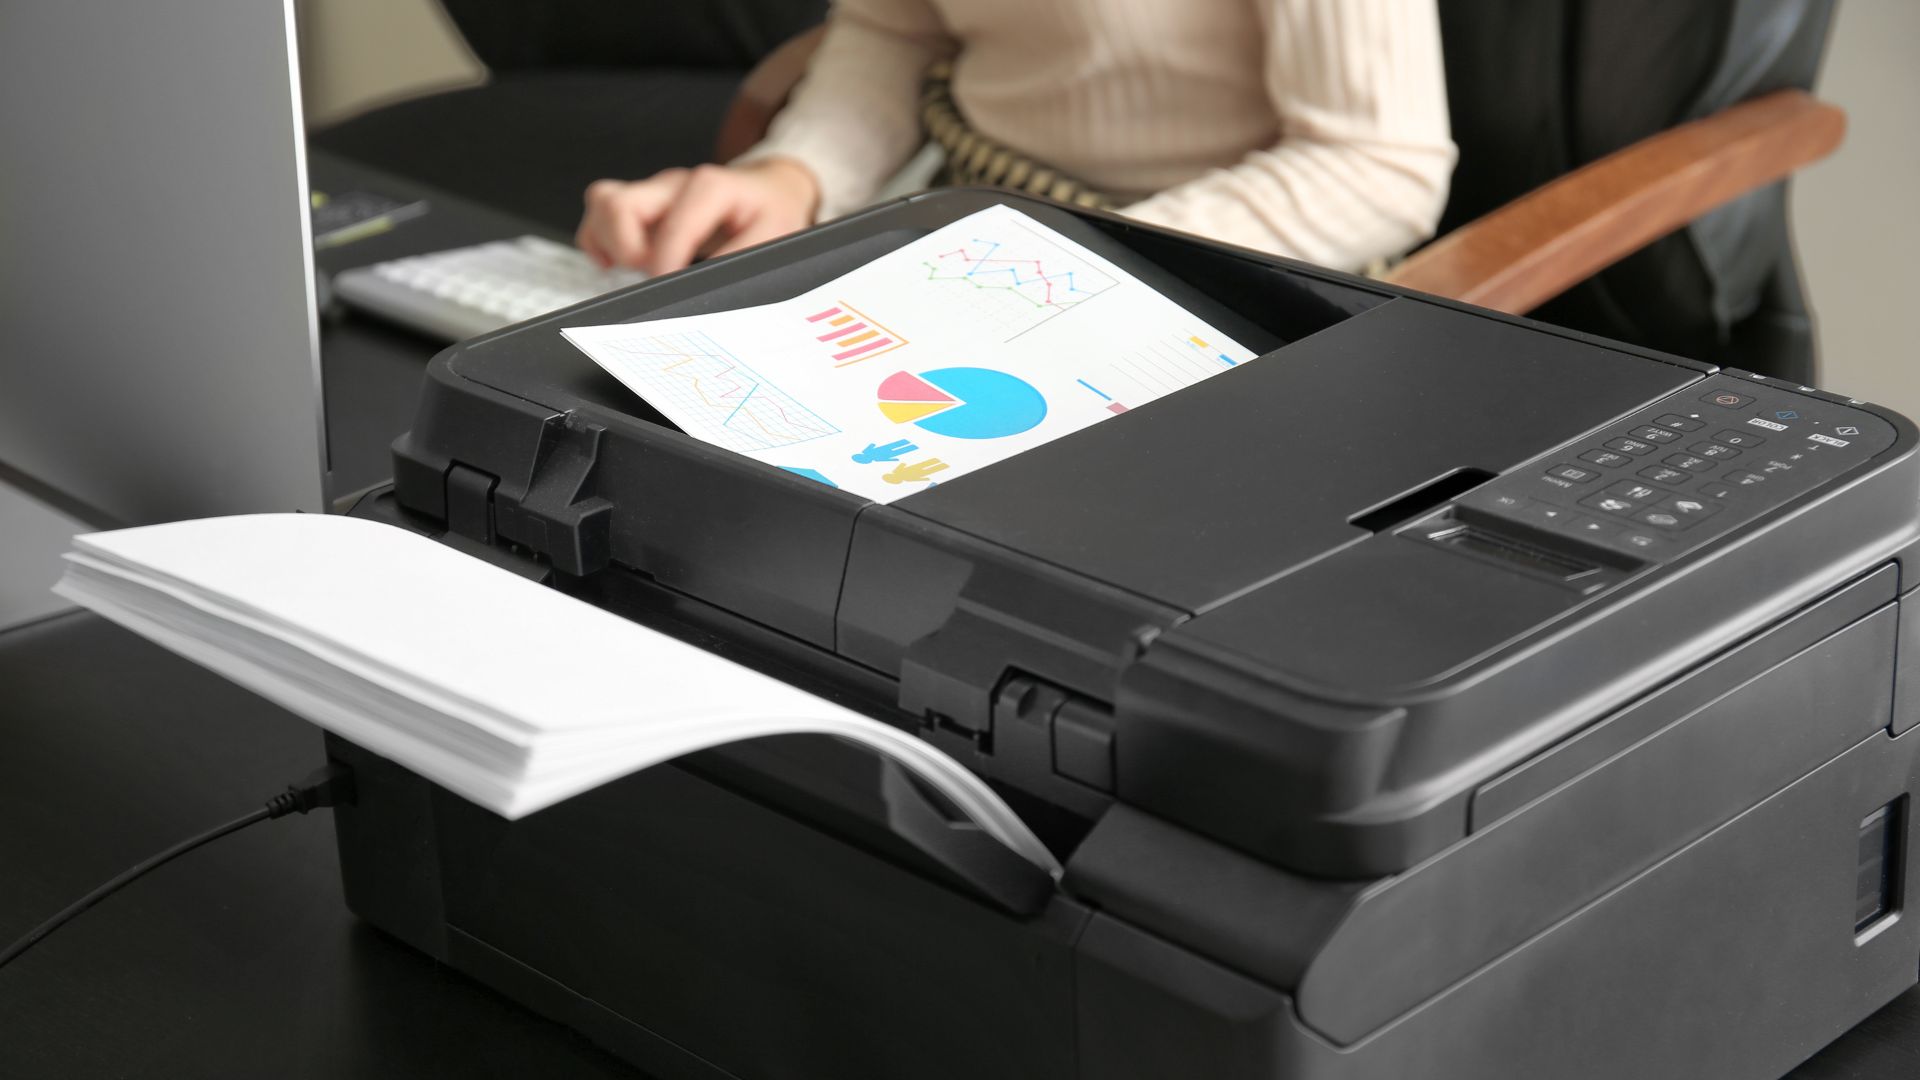 How to Collate Using a Printer